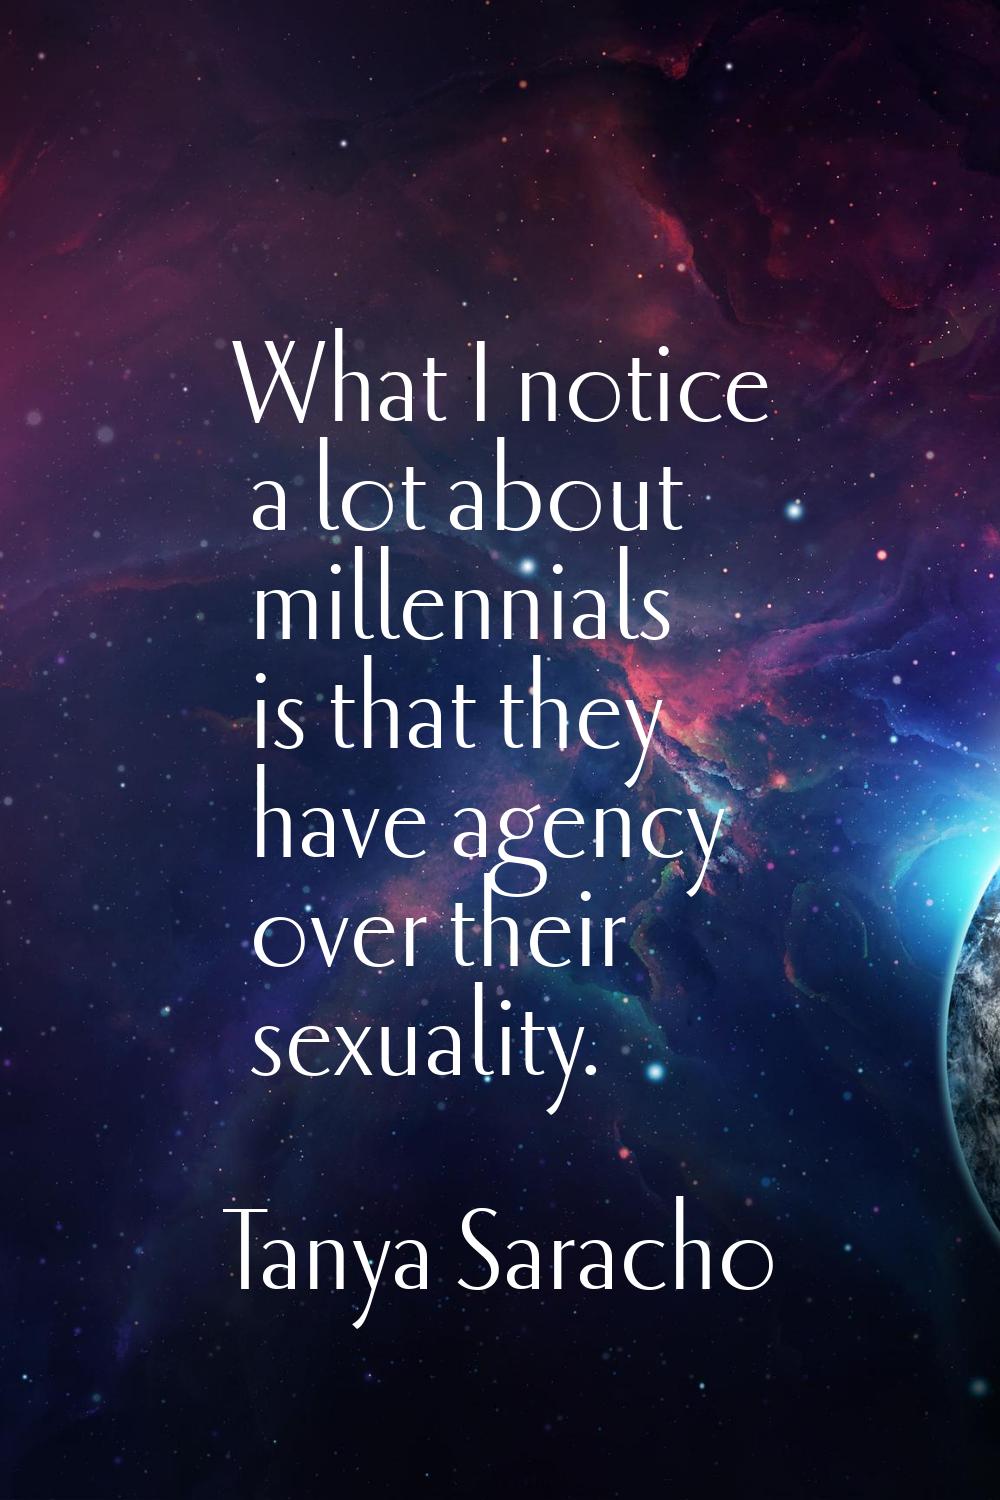 What I notice a lot about millennials is that they have agency over their sexuality.